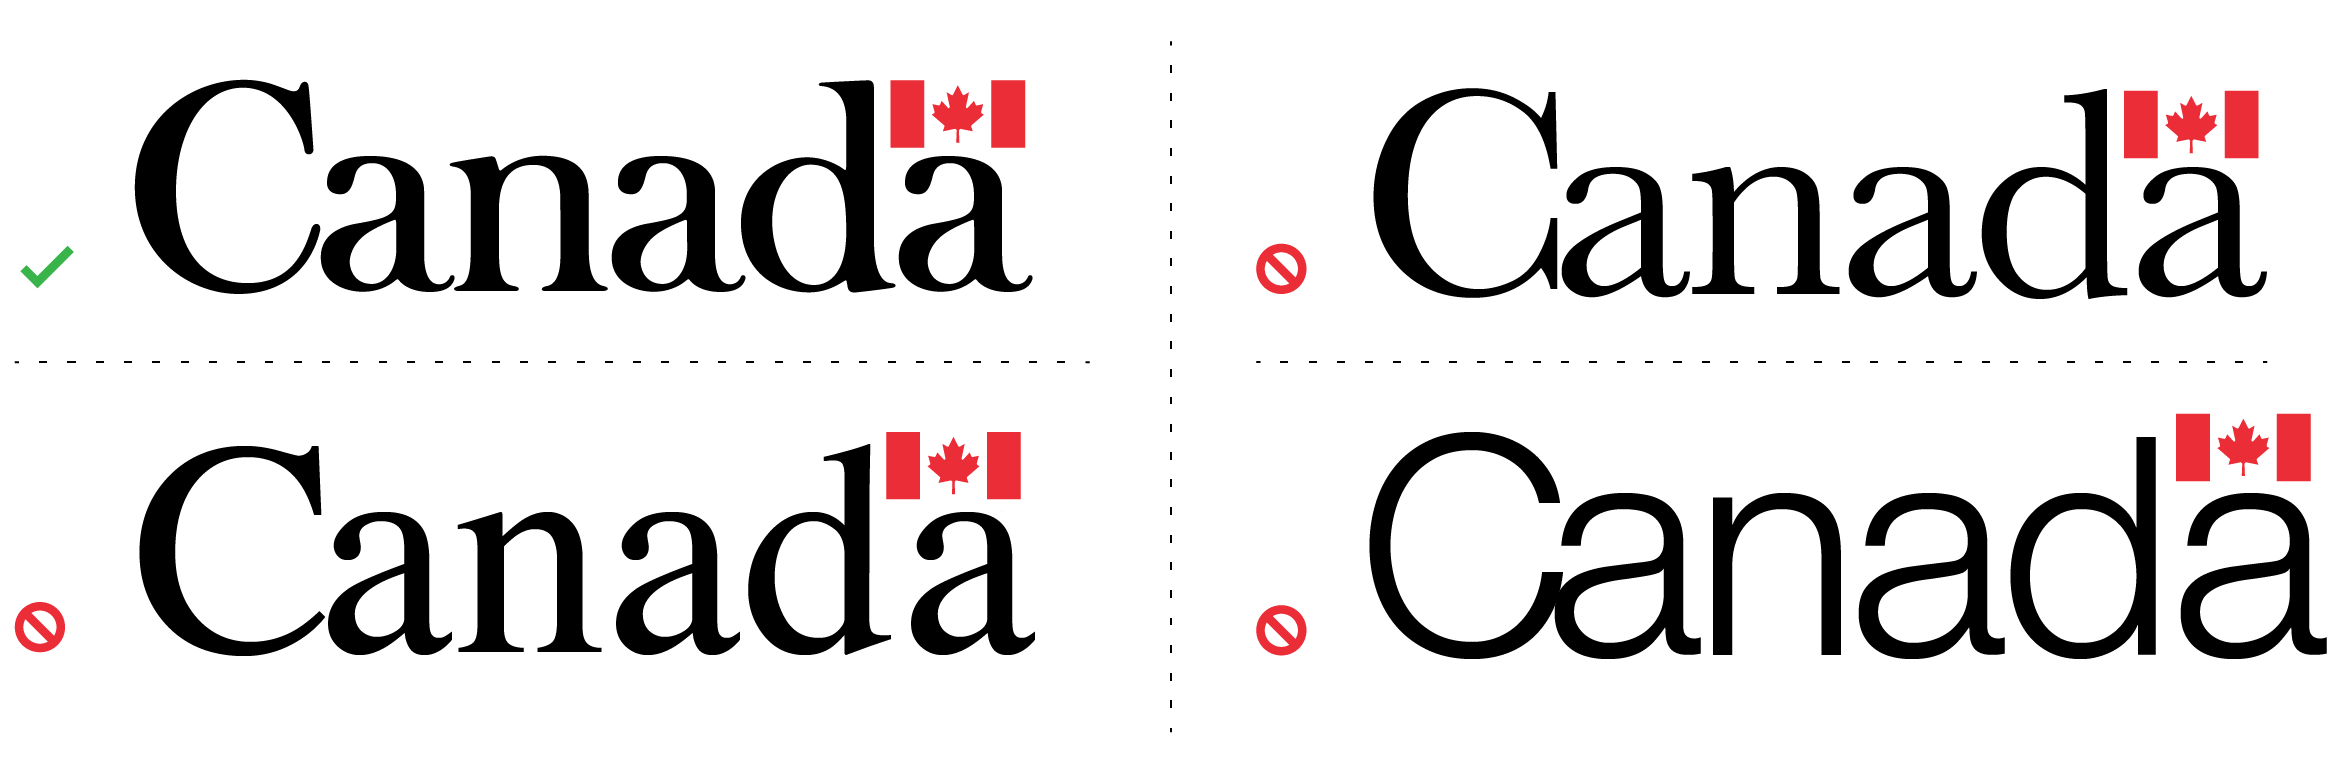 The correct Canada wordmark (top left) and 3 versions that are not in the correct typeface